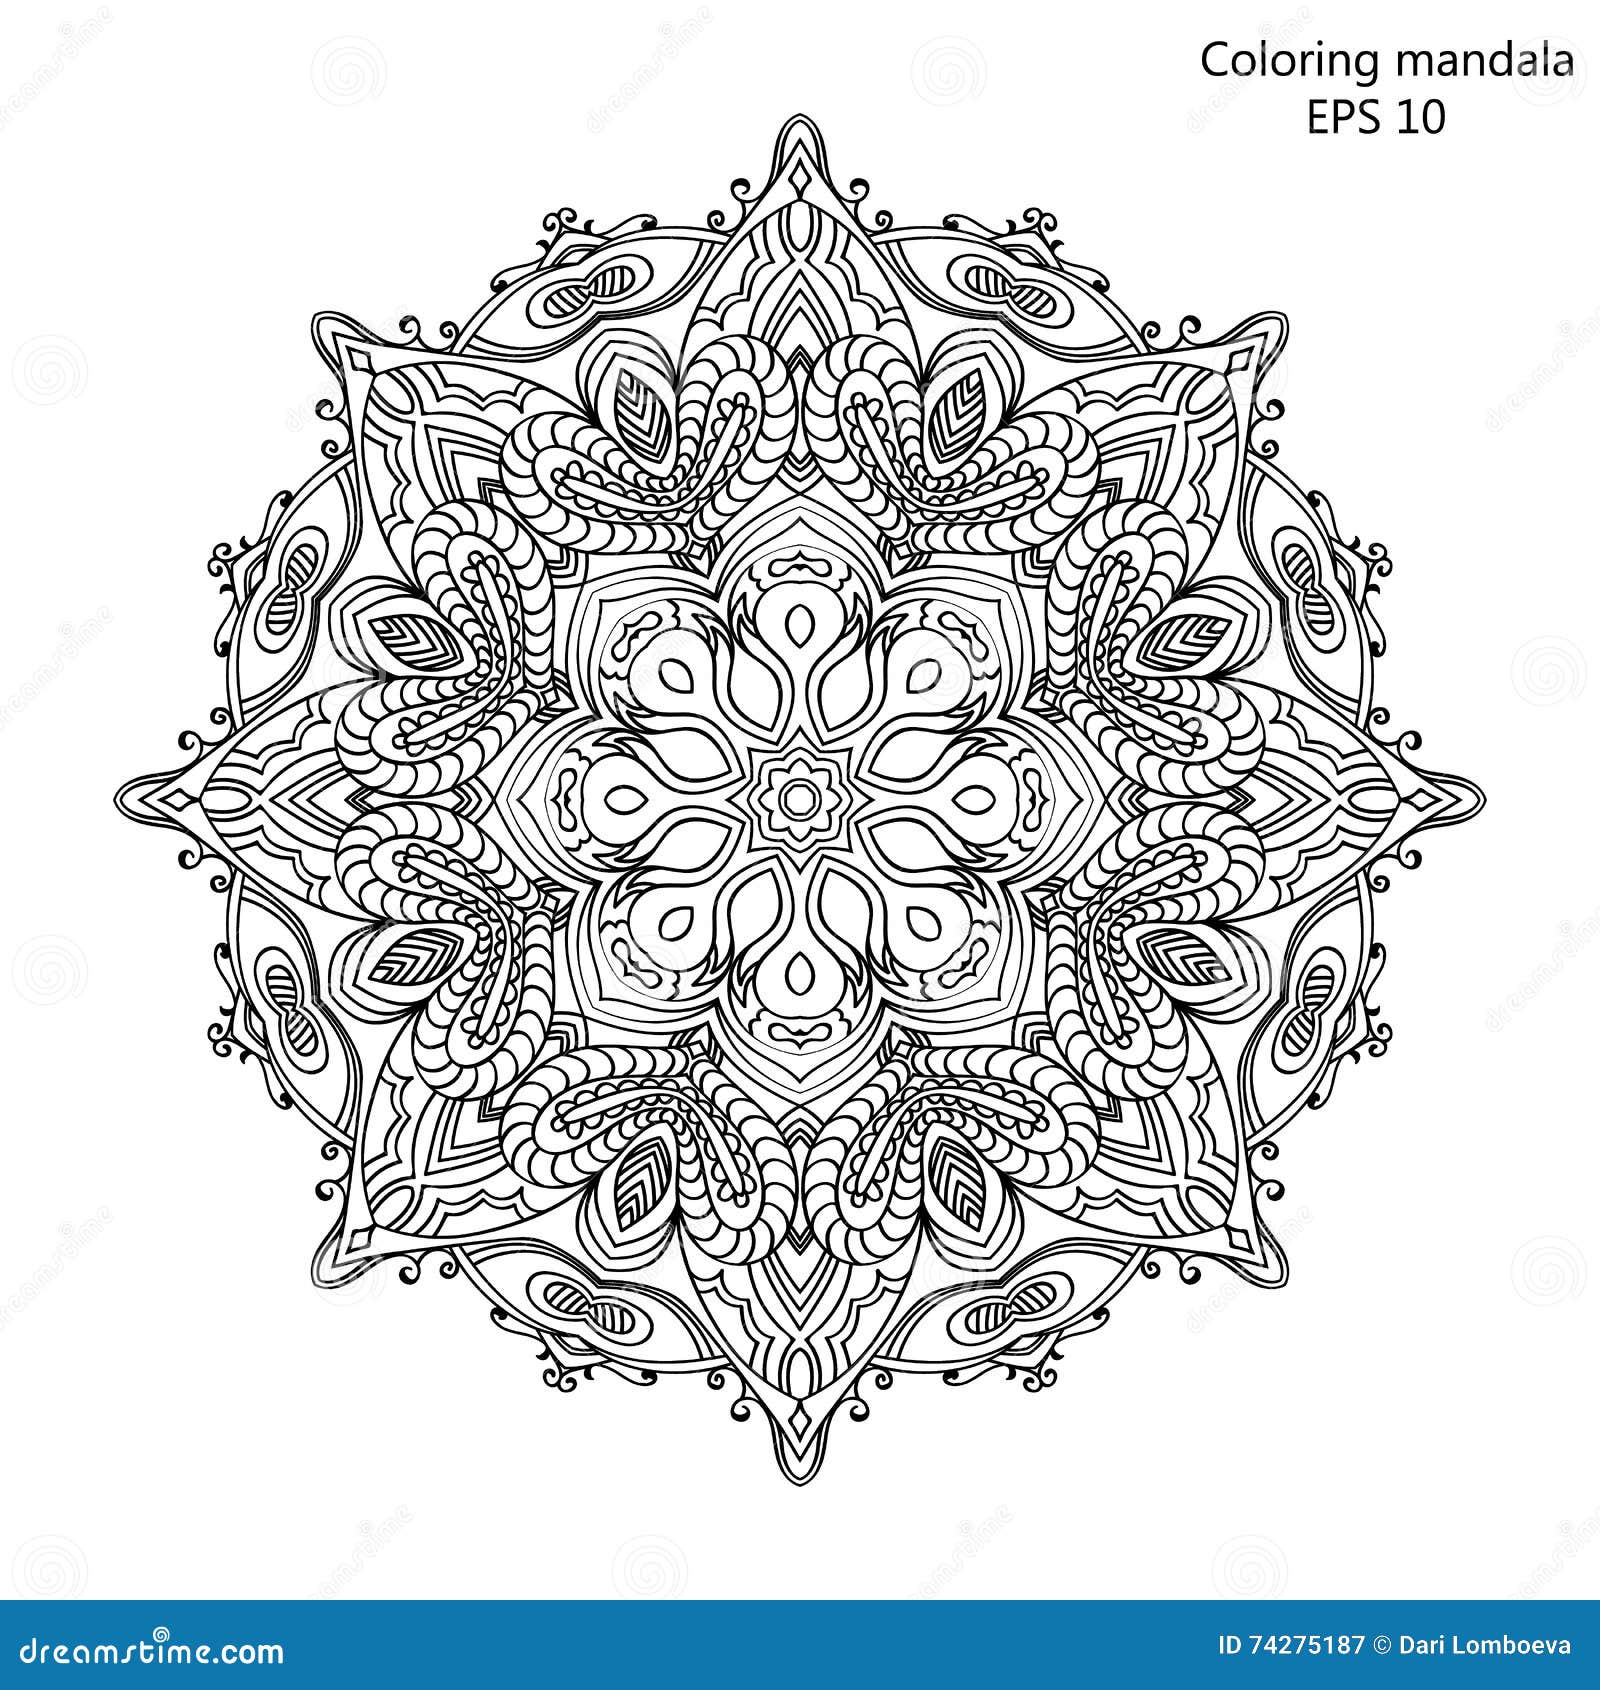 Download Coloring Book For Adult And Older Children. Page With Mandala Made Of Decorative Vintage Flowers ...